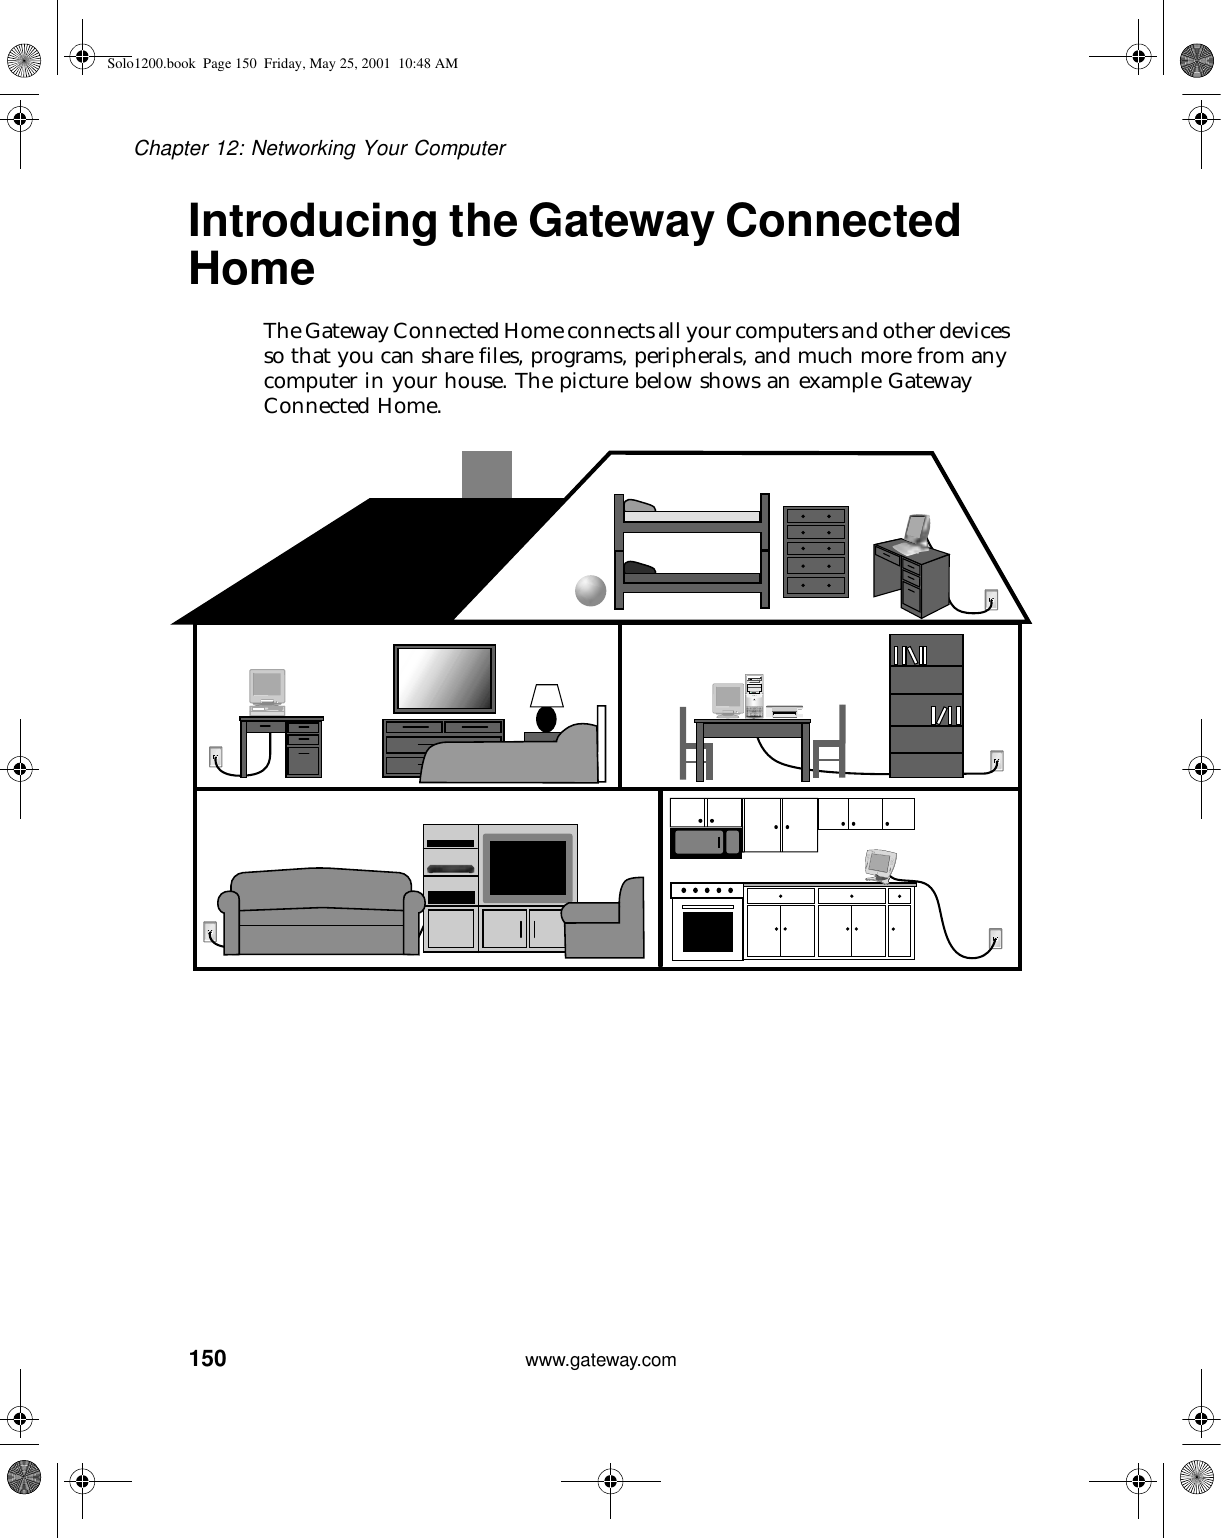 150Chapter 12: Networking Your Computerwww.gateway.comIntroducing the Gateway Connected HomeThe Gateway Connected Home connects all your computers and other devices so that you can share files, programs, peripherals, and much more from any computer in your house. The picture below shows an example Gateway Connected Home.Solo1200.book Page 150 Friday, May 25, 2001 10:48 AM